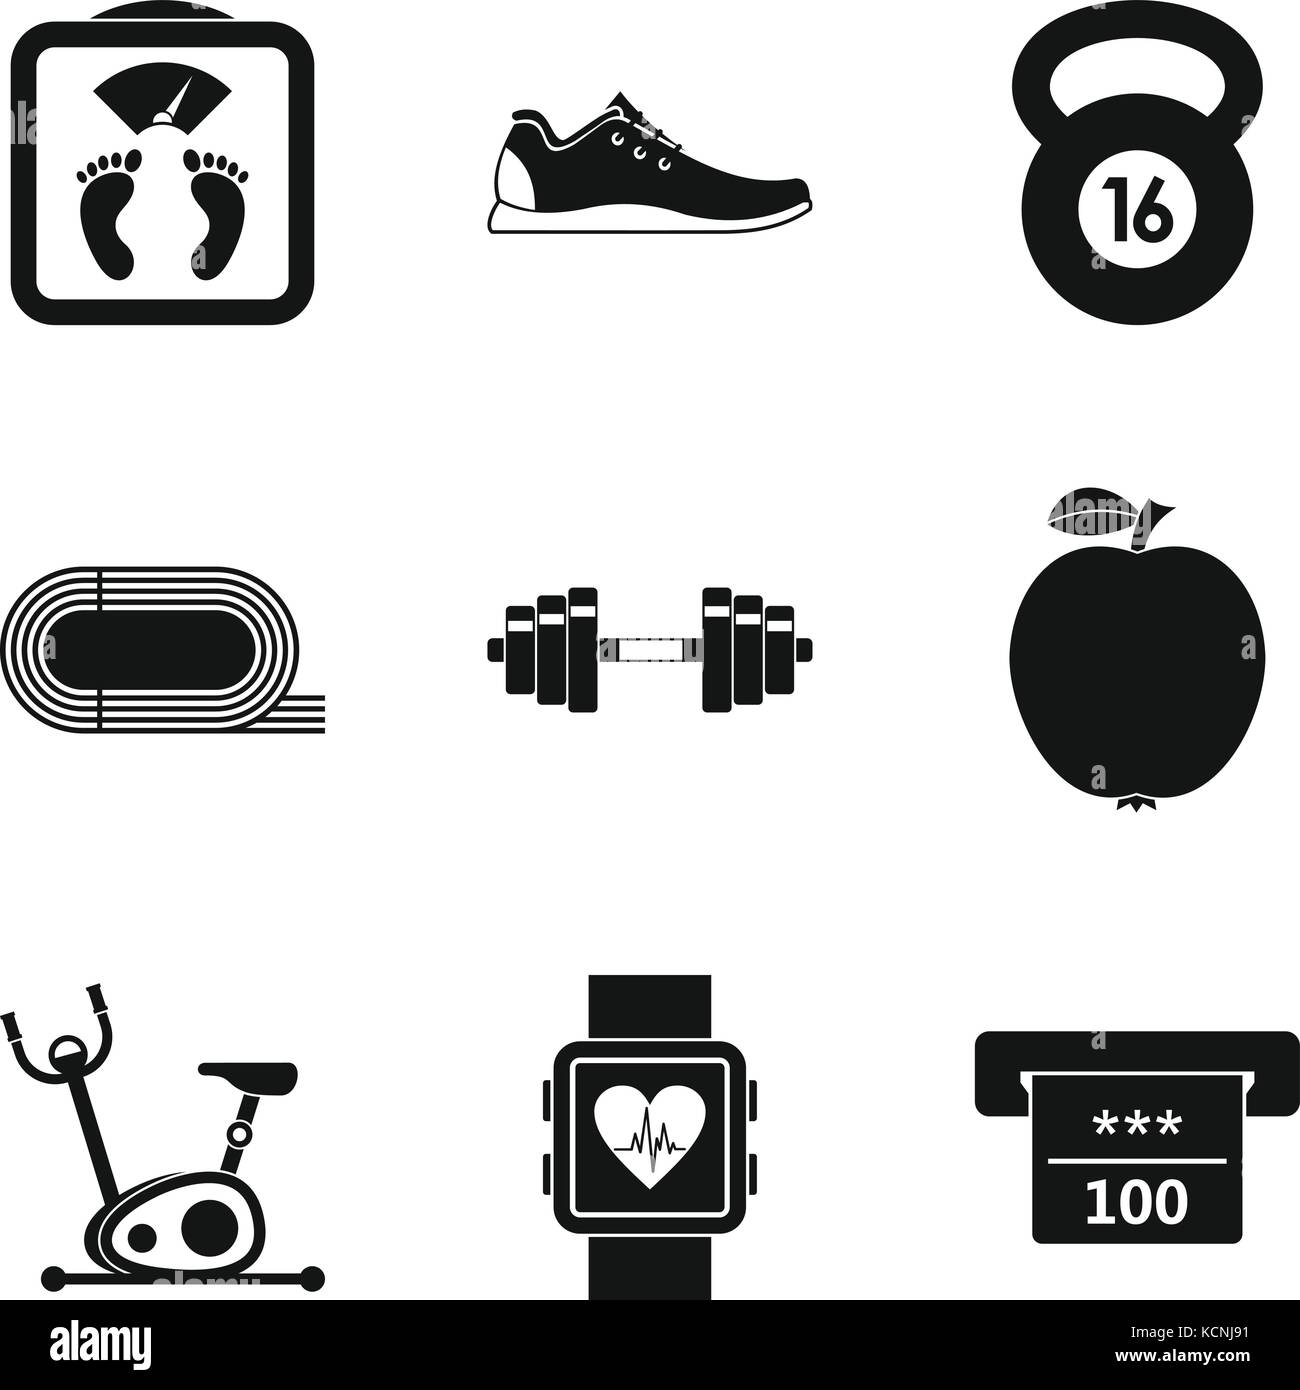 Hall for running icons set, simple style Stock Vector